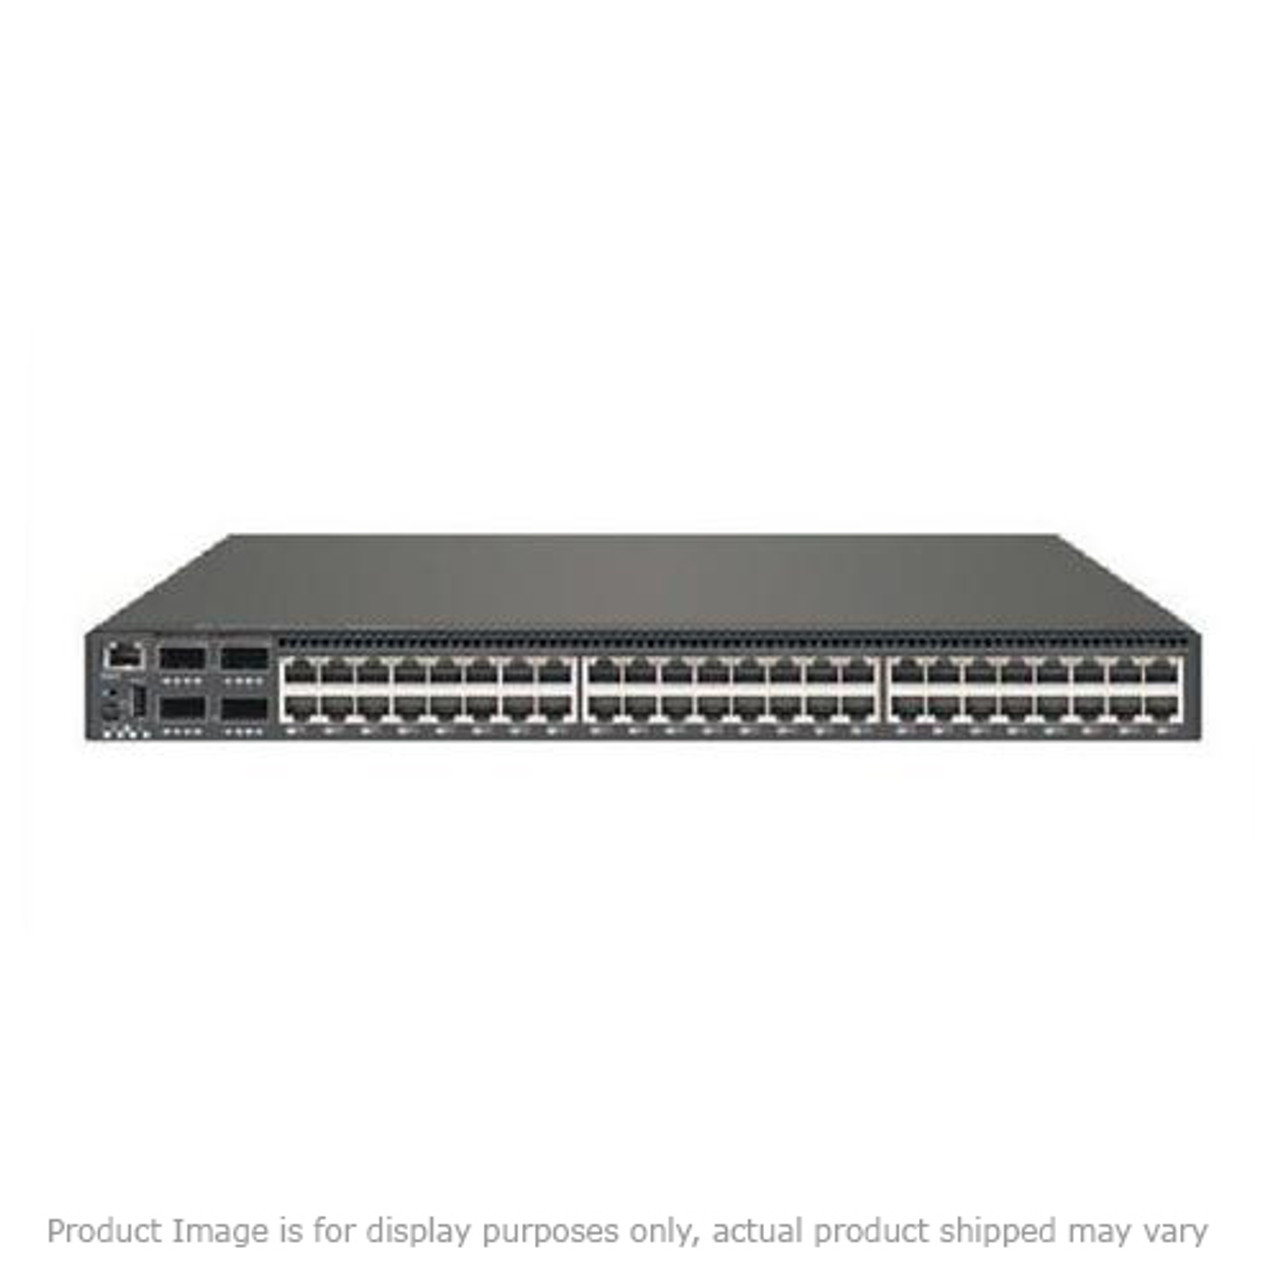 790199 Avocent 16-Ports Serial Console Switch Unit (Refurbished)